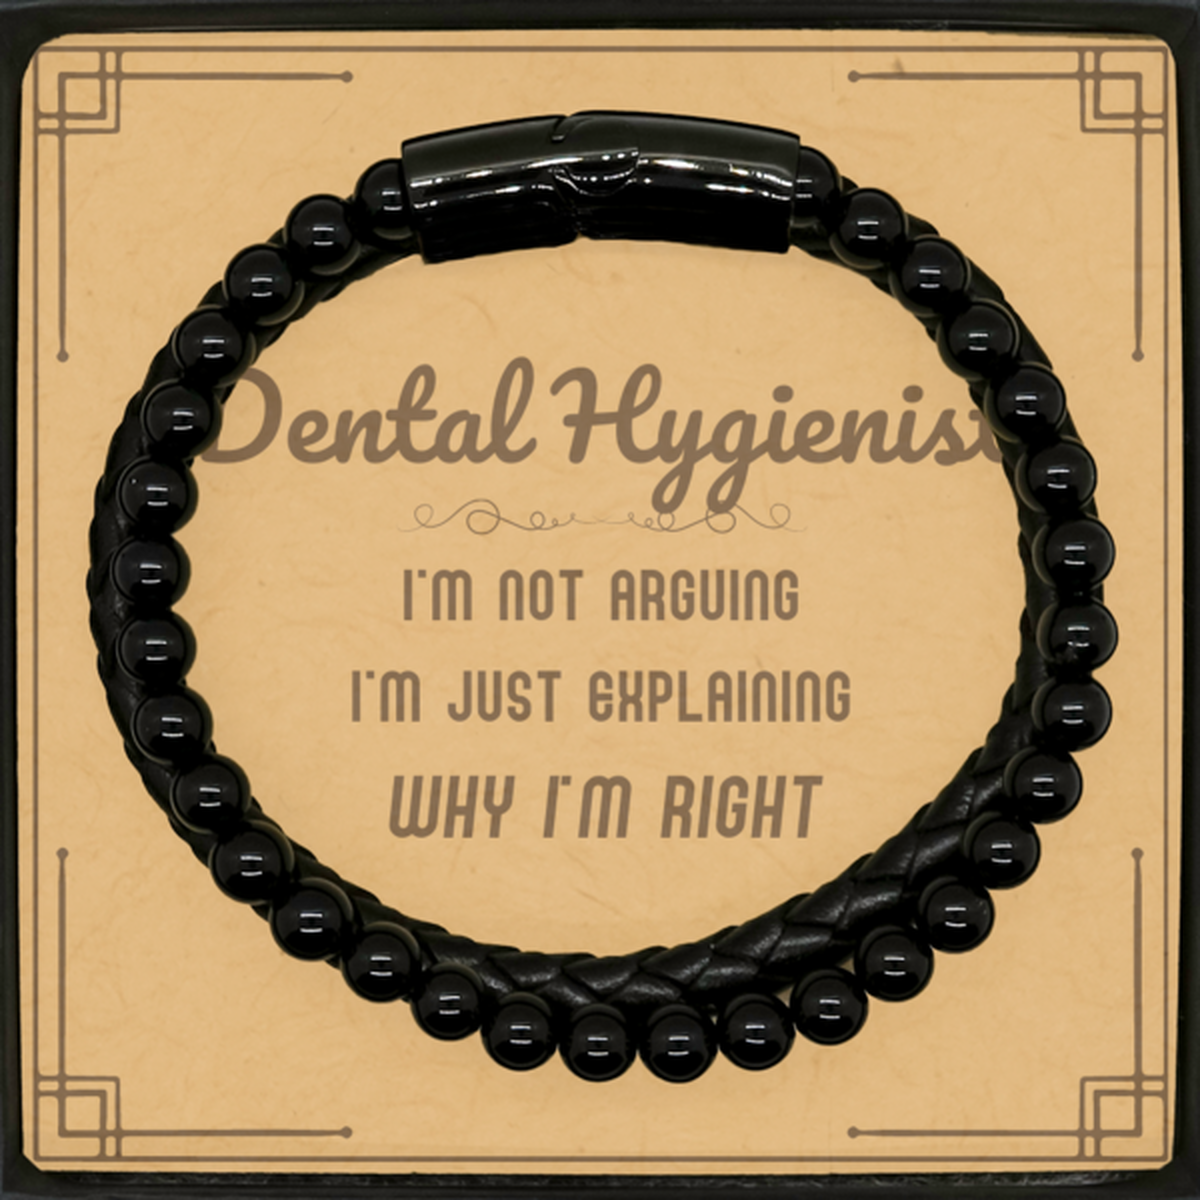 Dental Hygienist I'm not Arguing. I'm Just Explaining Why I'm RIGHT Stone Leather Bracelets, Funny Saying Quote Dental Hygienist Gifts For Dental Hygienist Message Card Graduation Birthday Christmas Gifts for Men Women Coworker